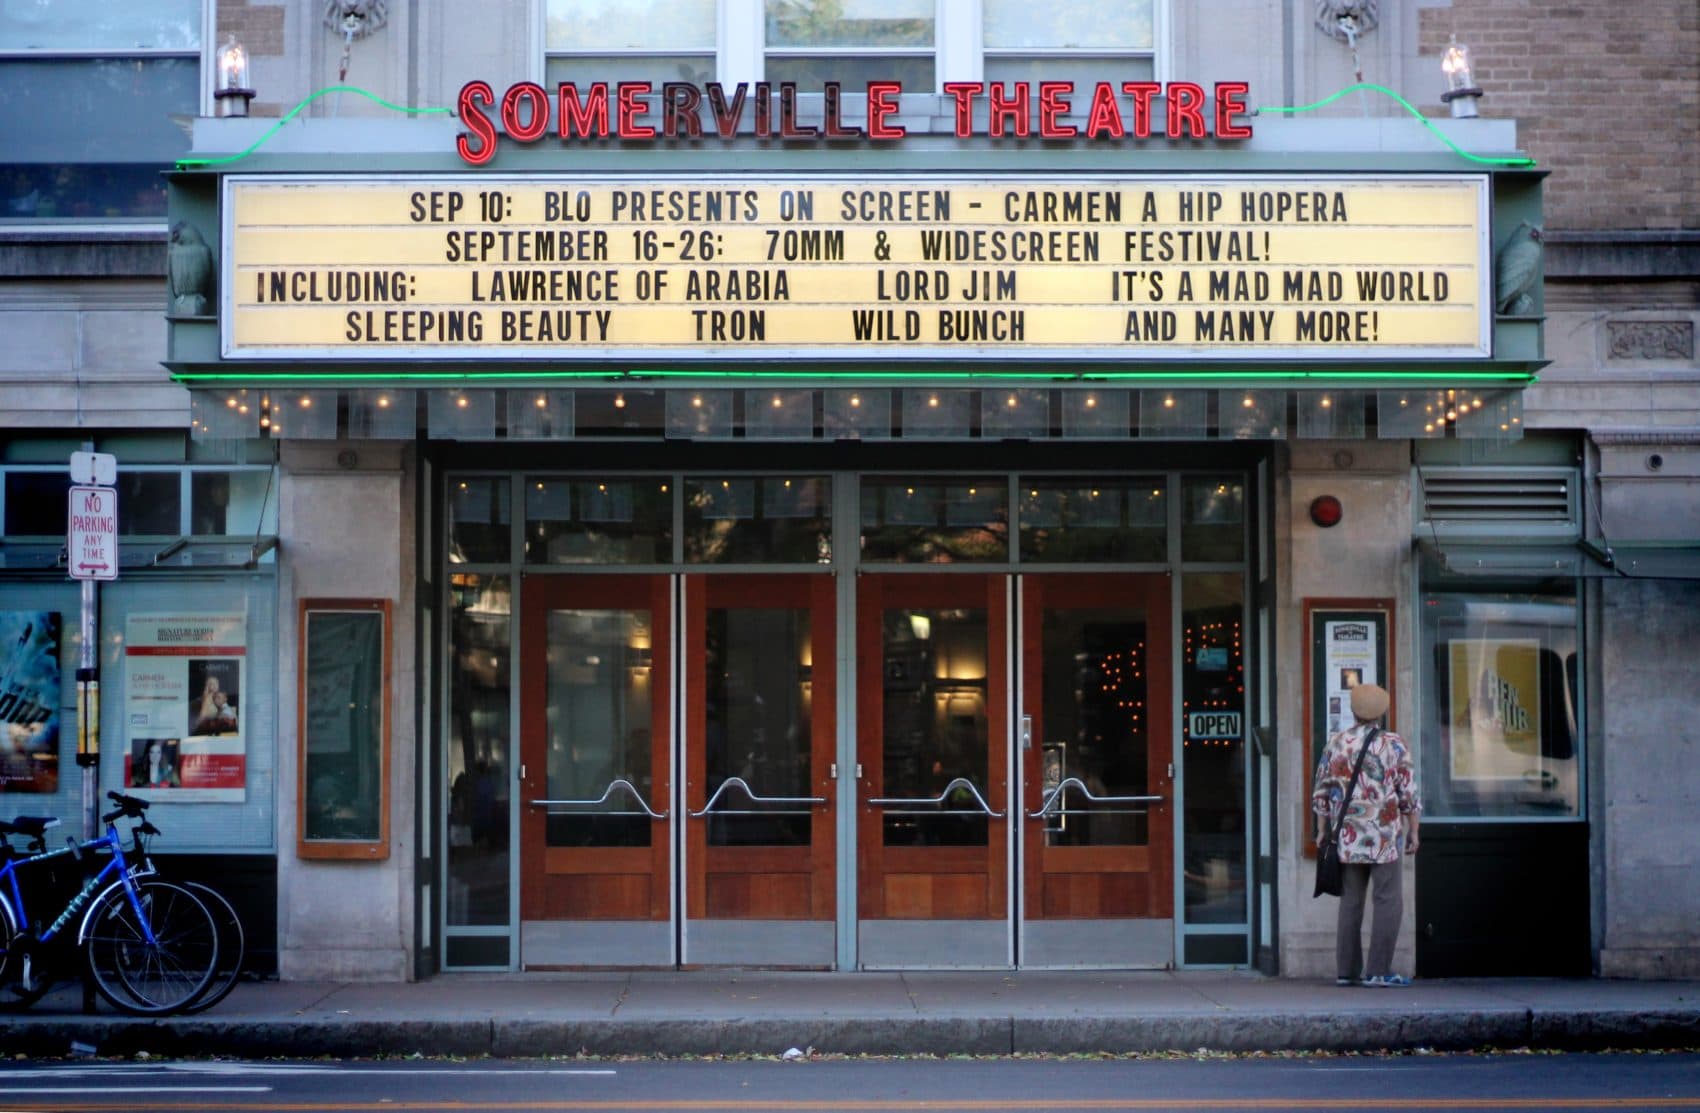 Somerville Theatre presents the 70mm and Widescreen Festival starting Friday, Sept. 16. (Amy Gorel for WBUR)